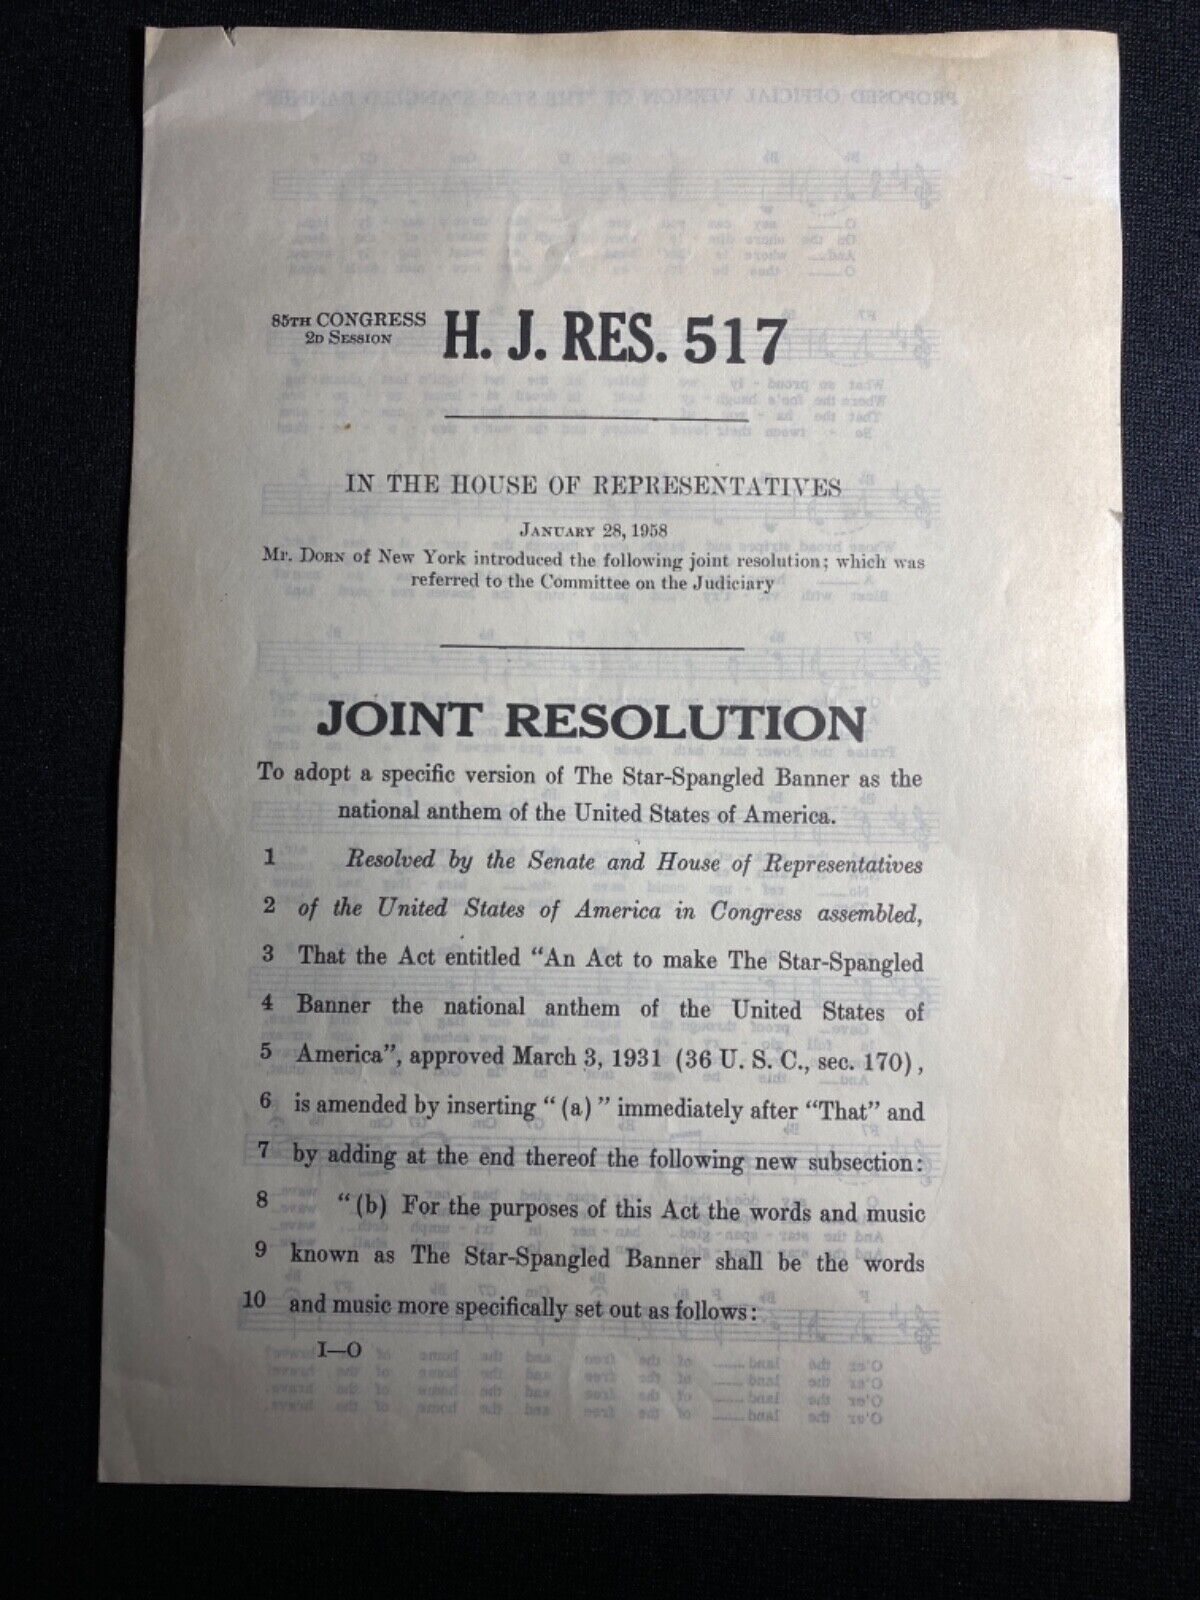 1958 Joint Resolution of Congress Adopting Off. Version of Star Spangled Banner